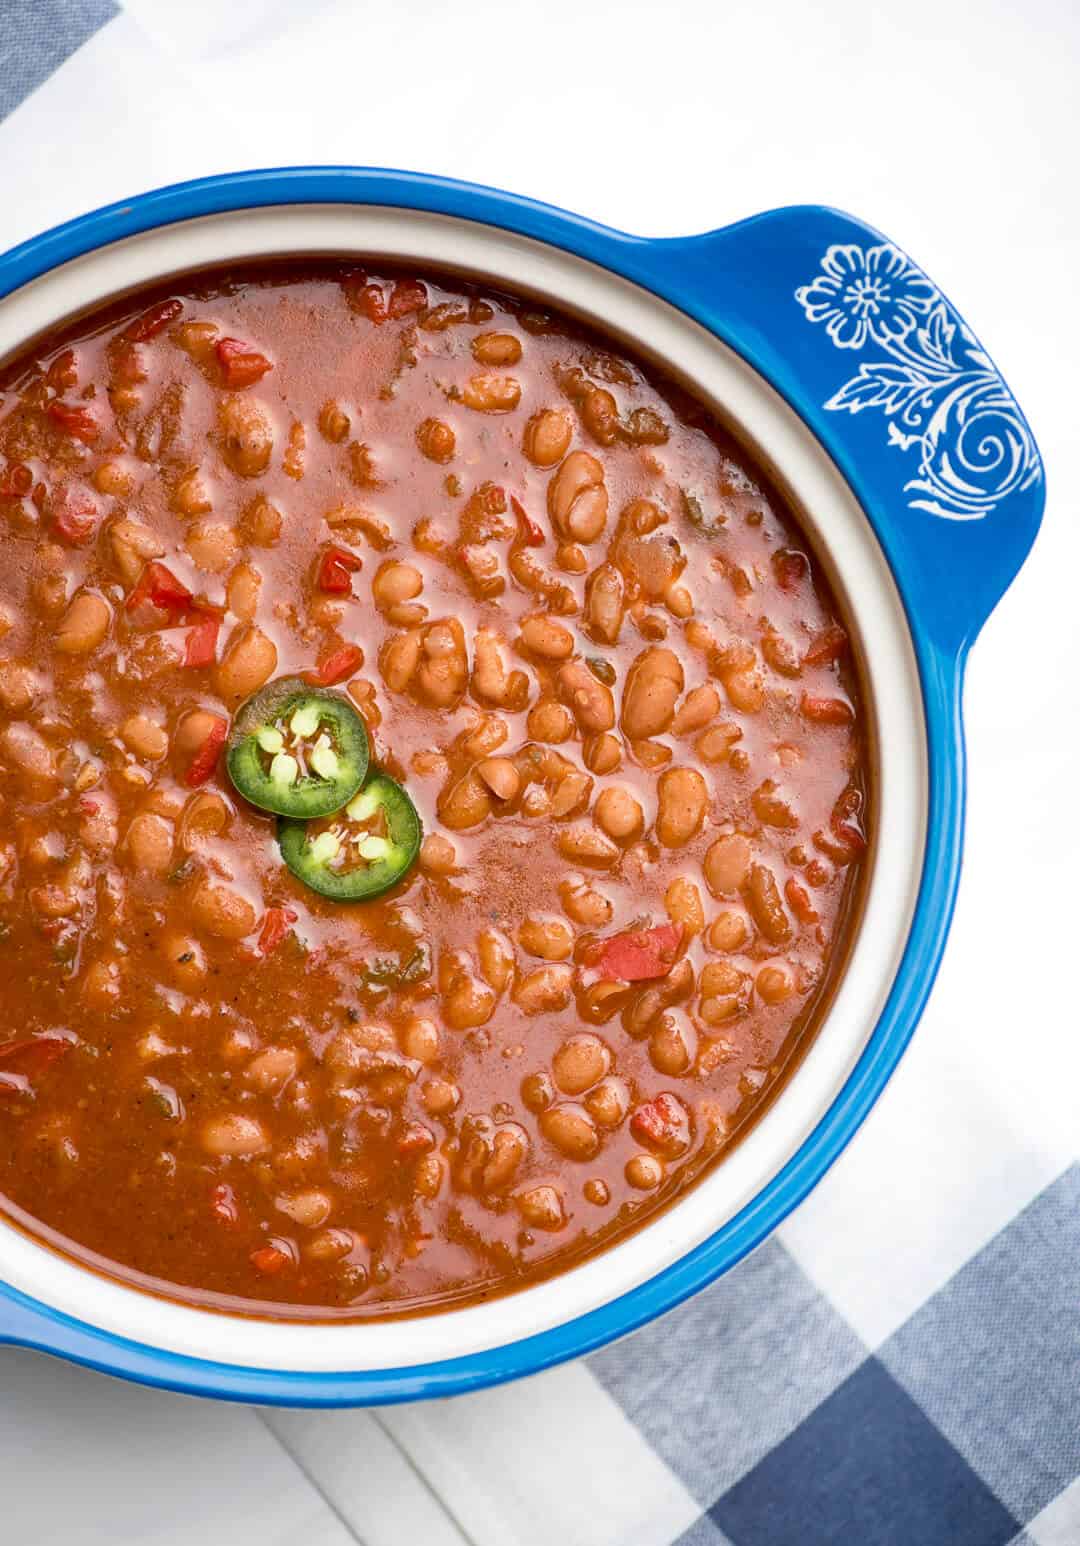 Mexican pinto beans in a decorative blue dish.